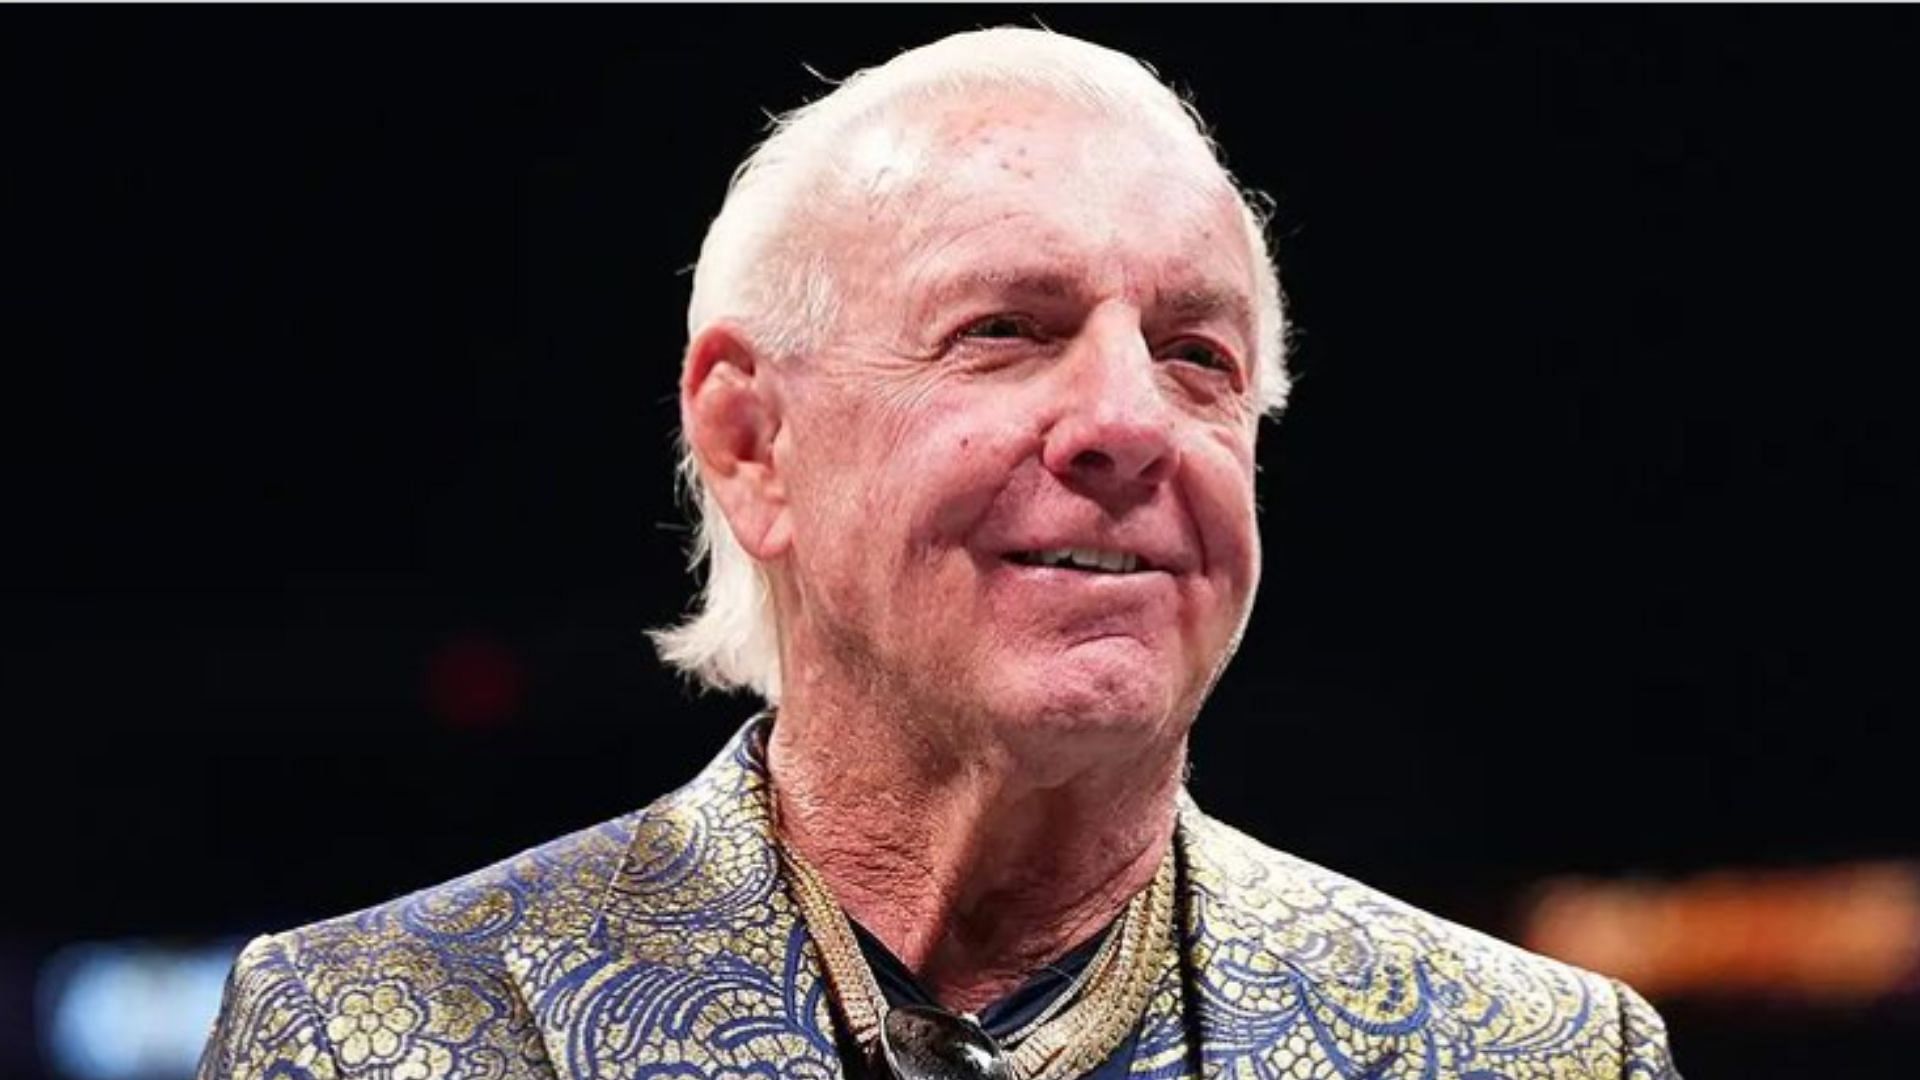 Ric Flair is a former WCW World Champion [Image Credit: Flair